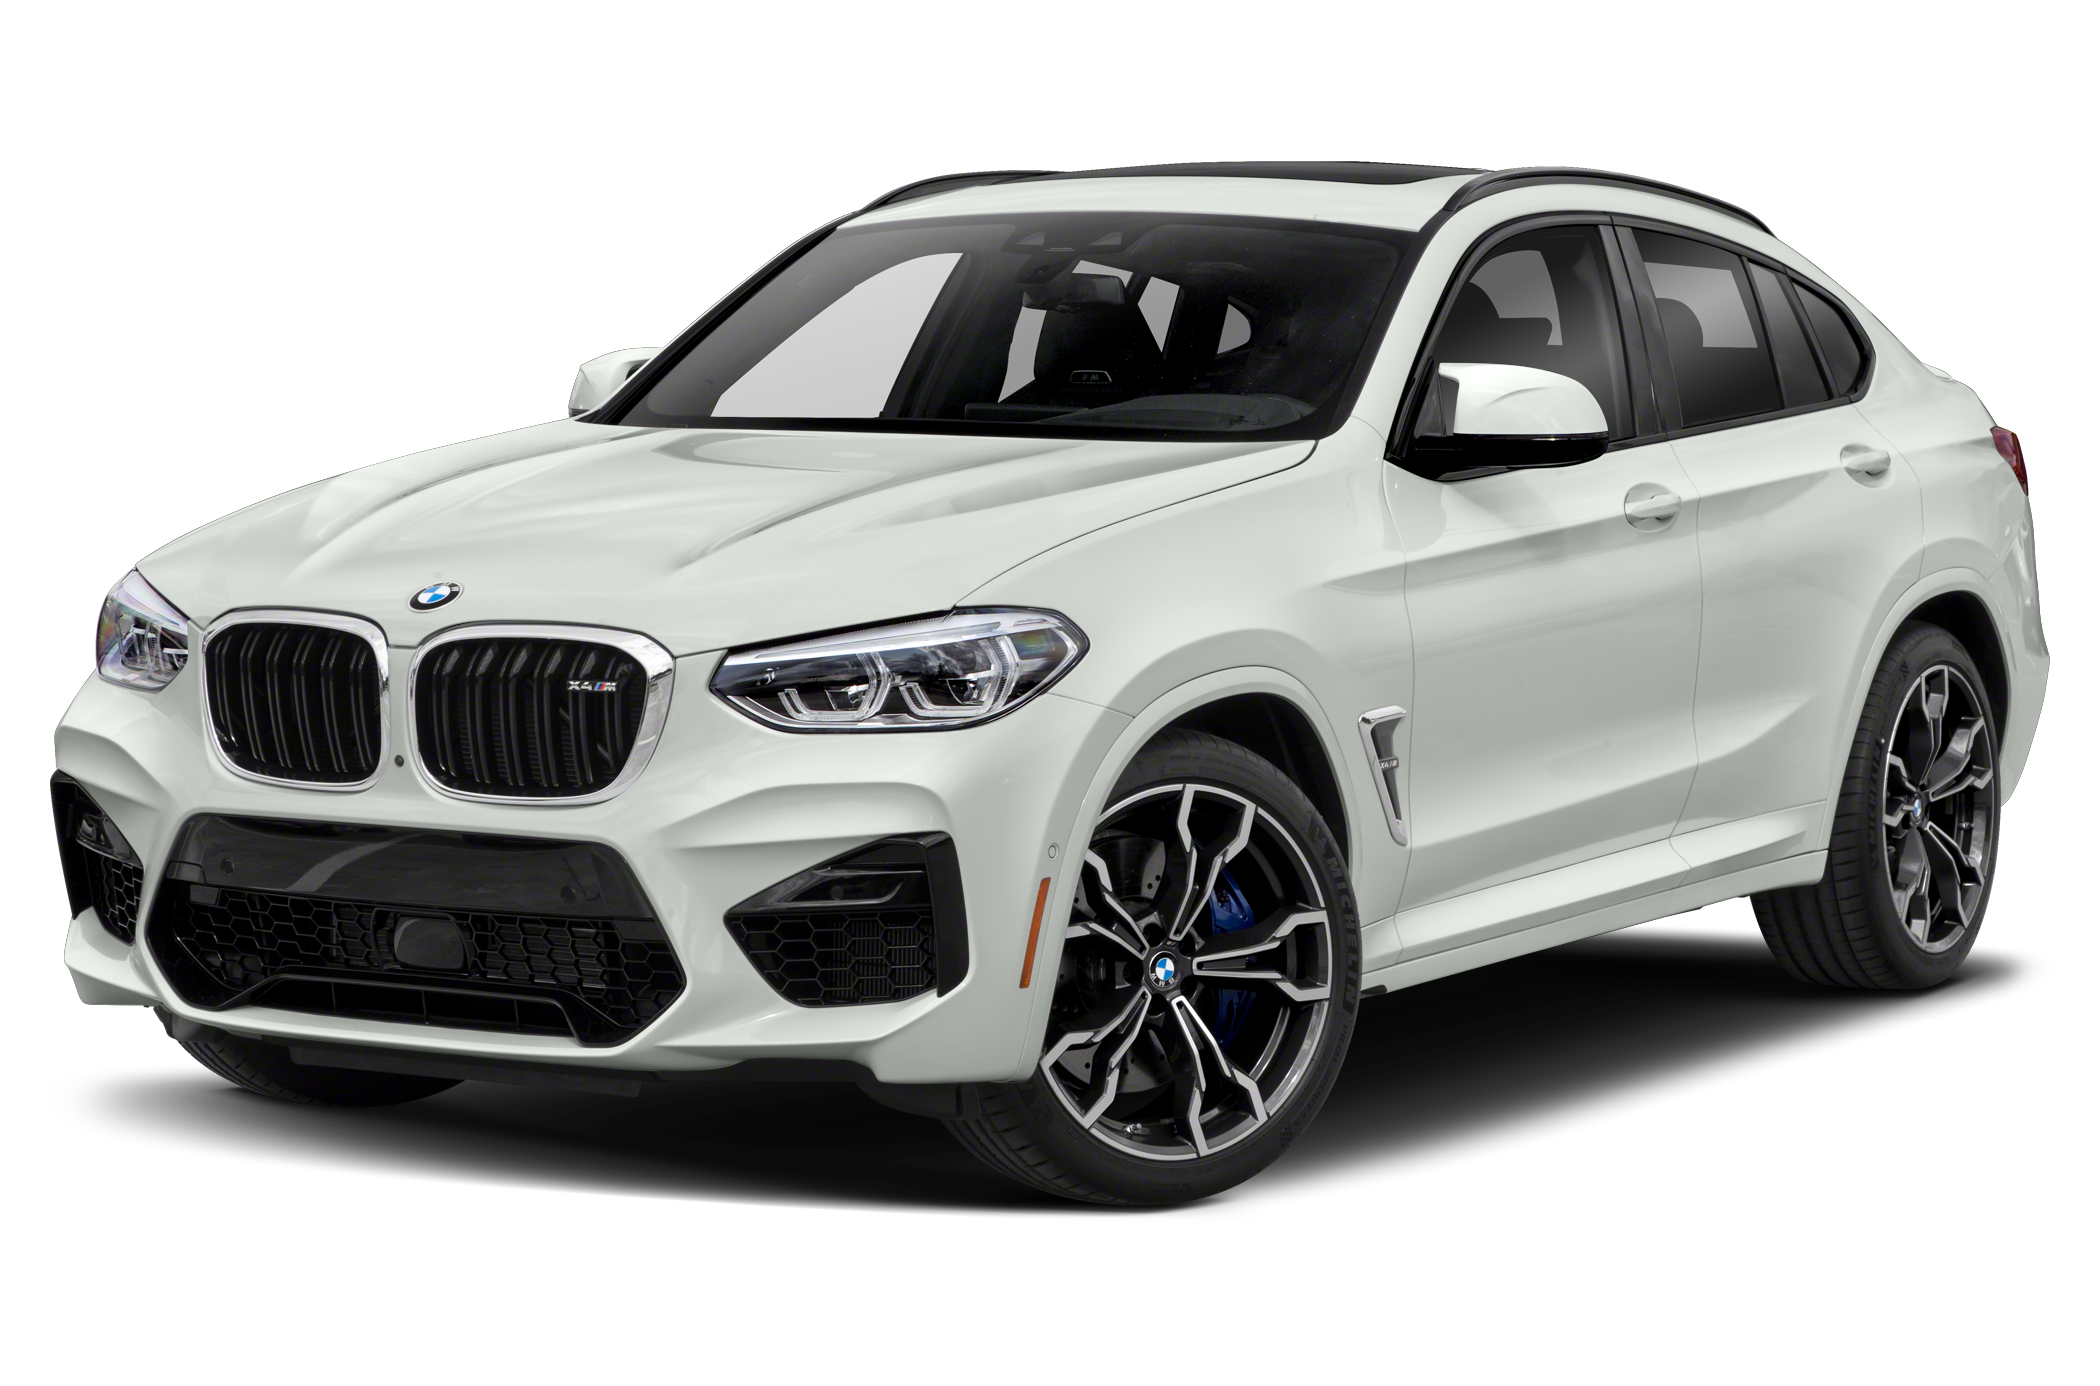  BMW X4 oem parts and accessories on sale